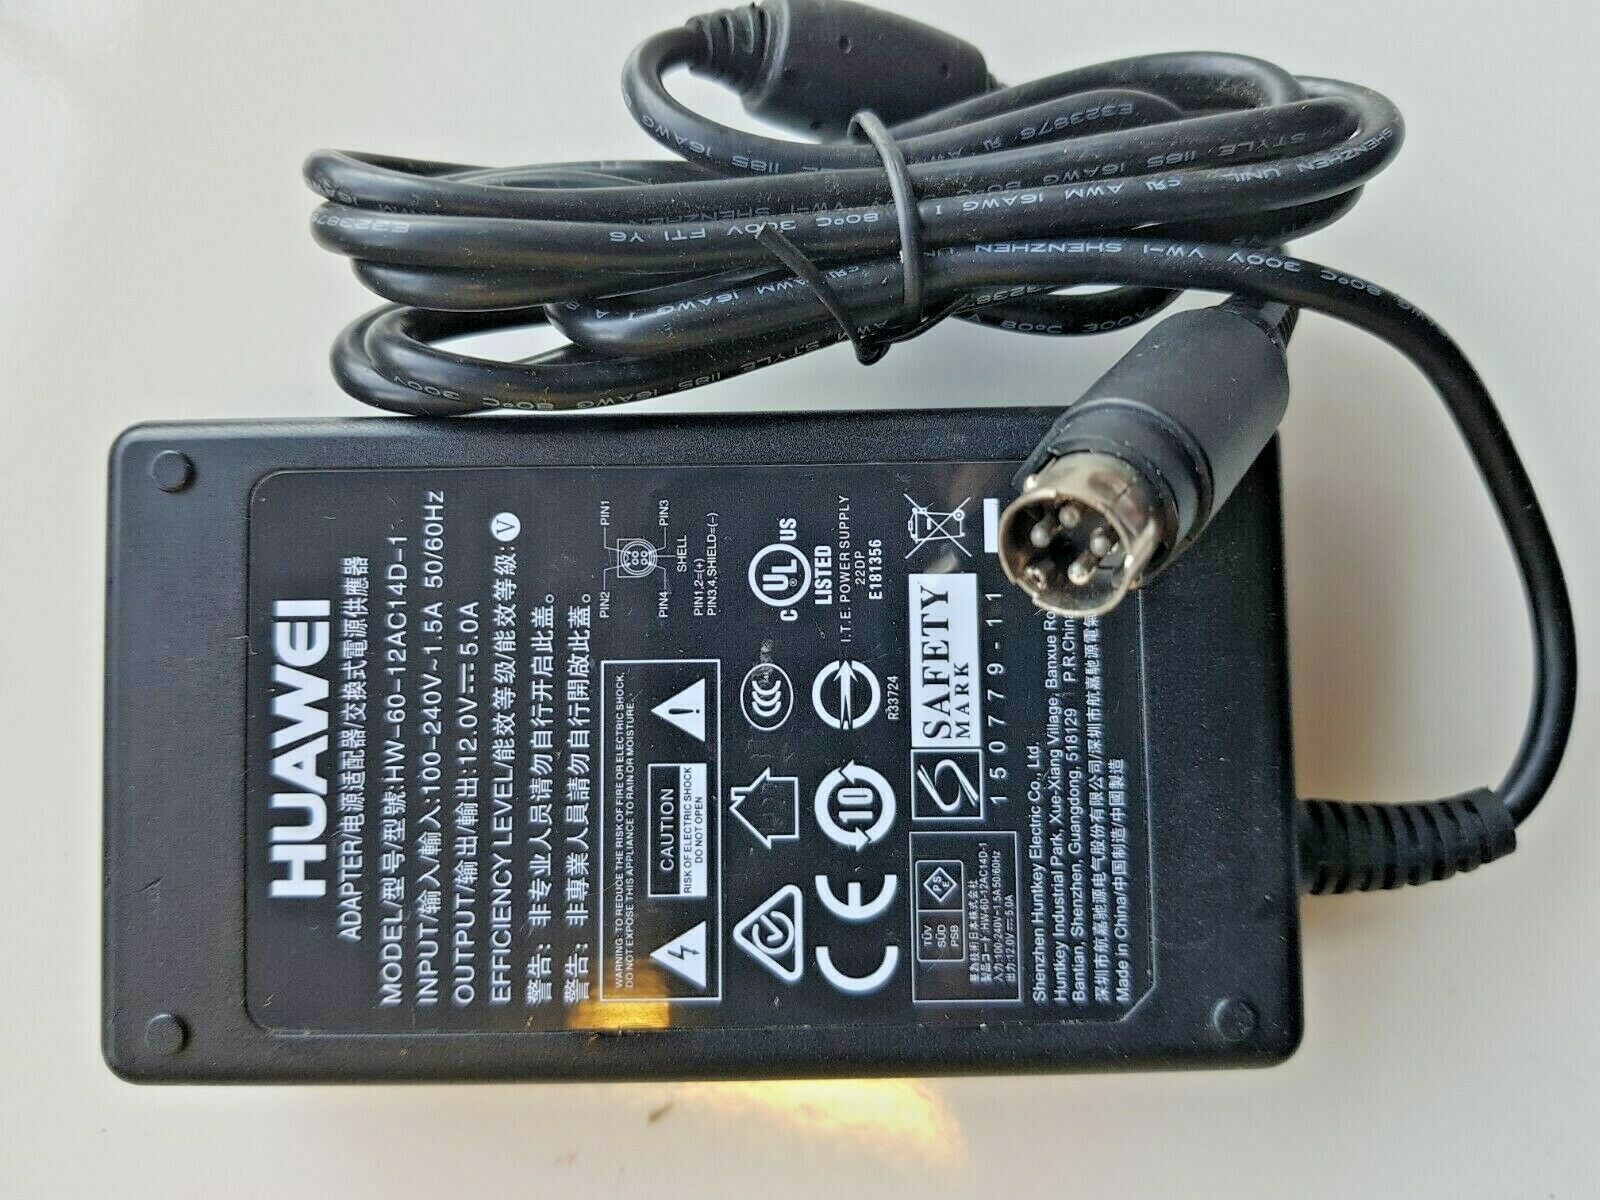 *Brand NEW*HUAWEI HW-60-12AC14D-1 4 PIN DIN 4 ROUTER 12V 5A AC Adapter Power Supply